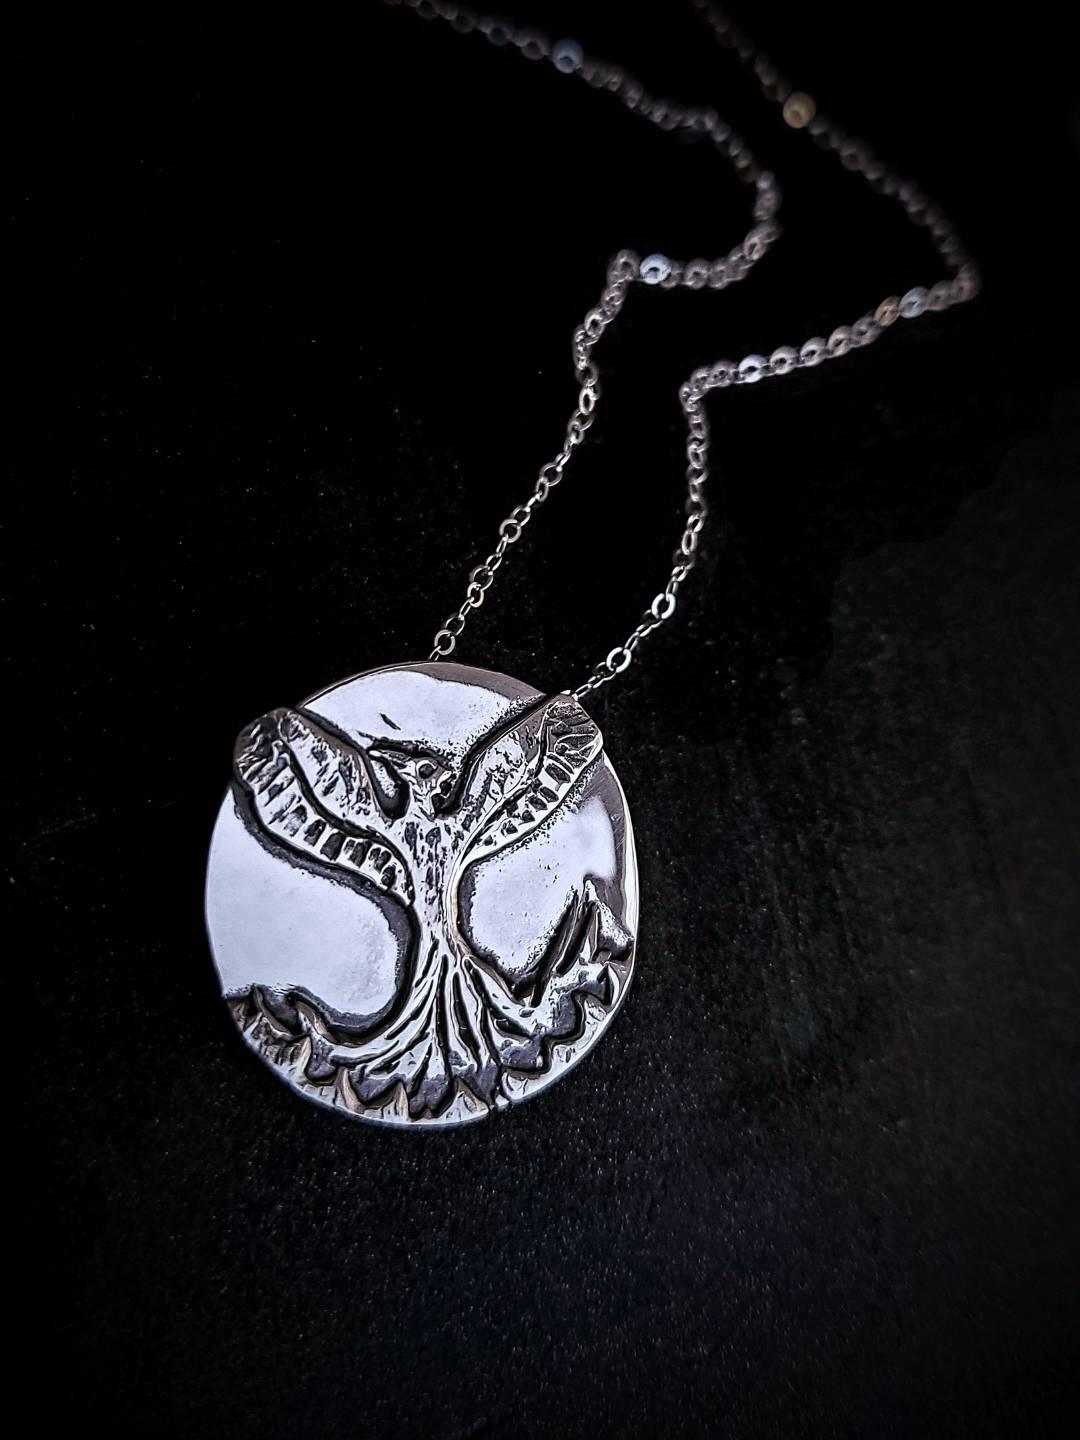 Phoenix necklace representing resilience and rebirth